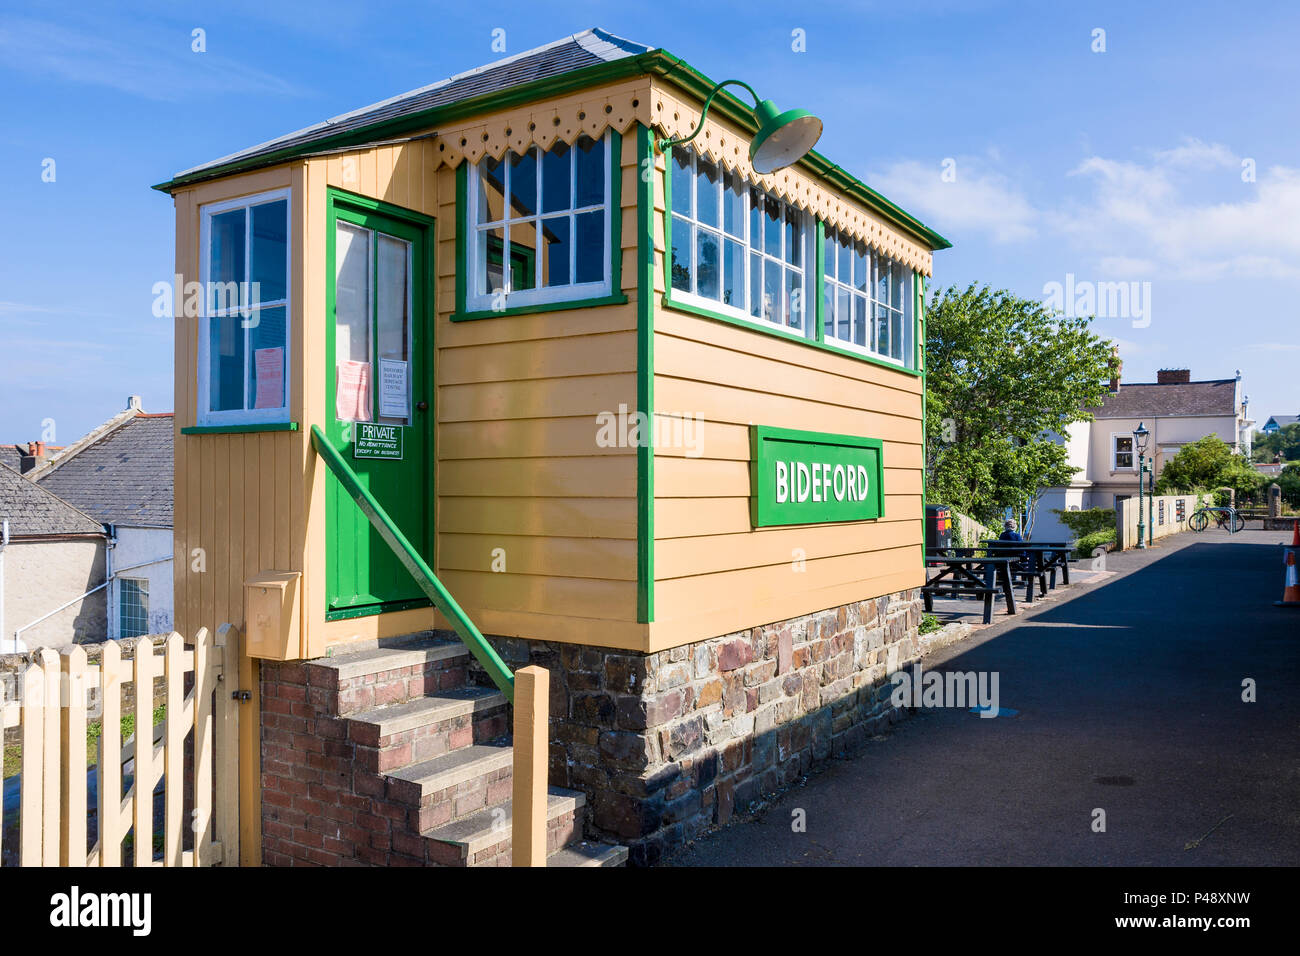 The surviving signal box at the non-operational railway station in Bideford North Devon UK Stock Photo